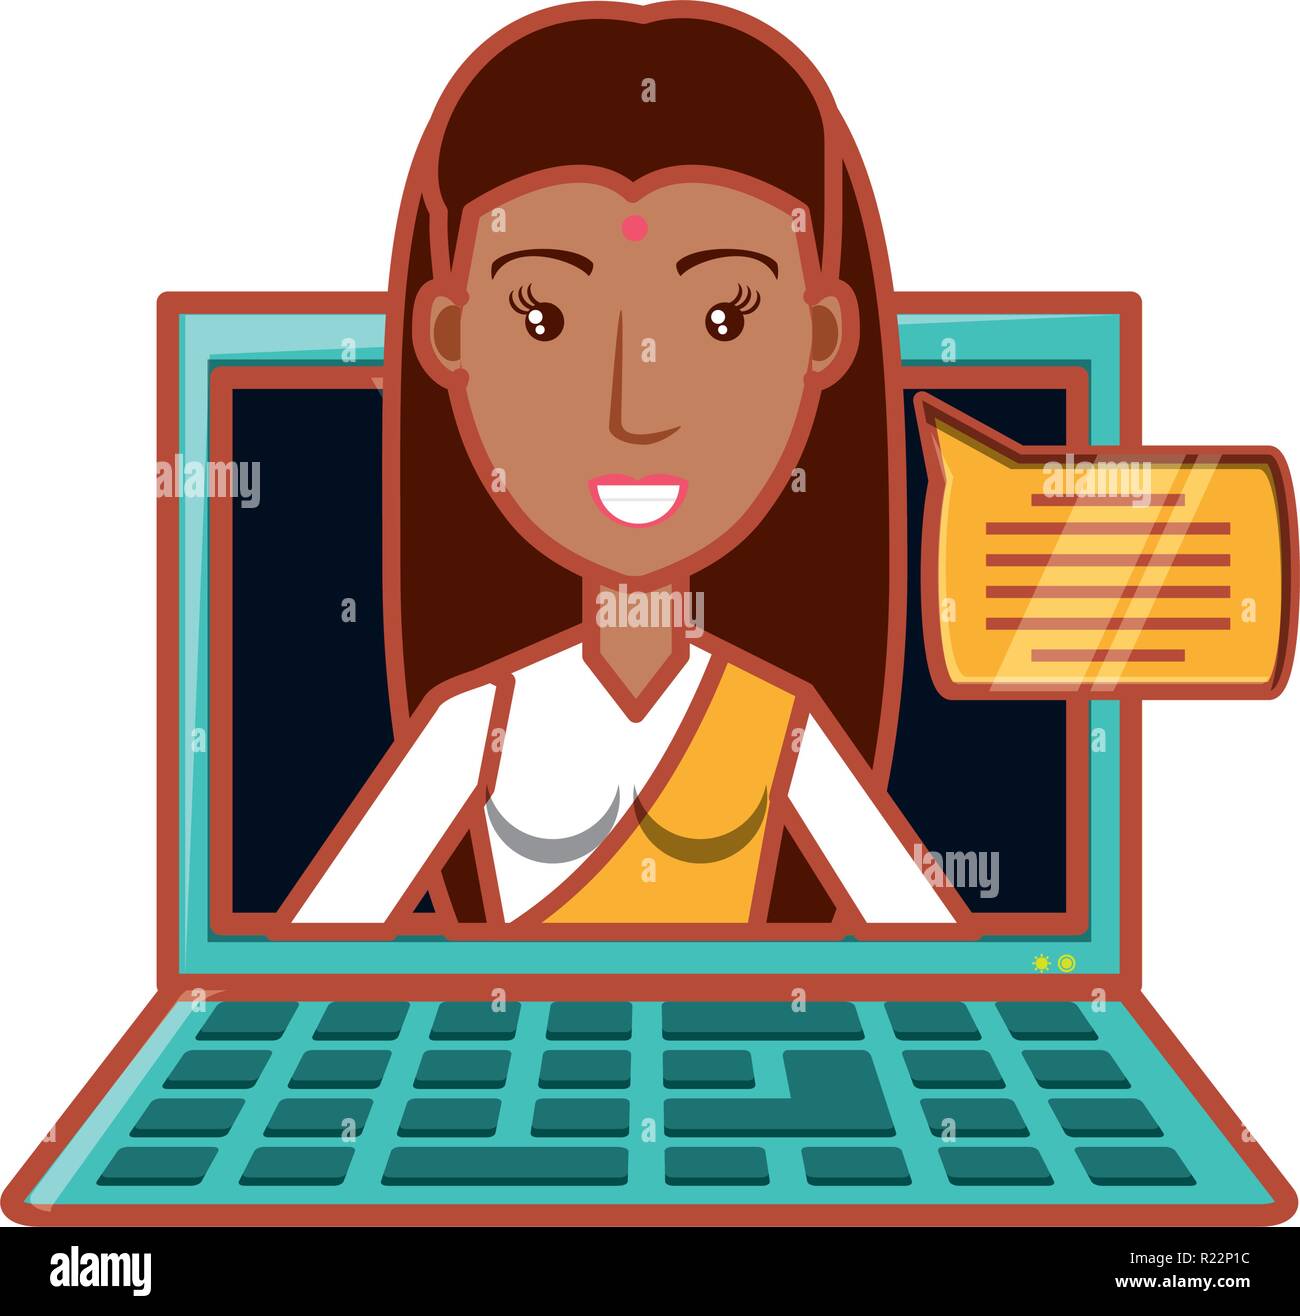 woman indian with laptop and speech bubble vector illustration design Stock Vector